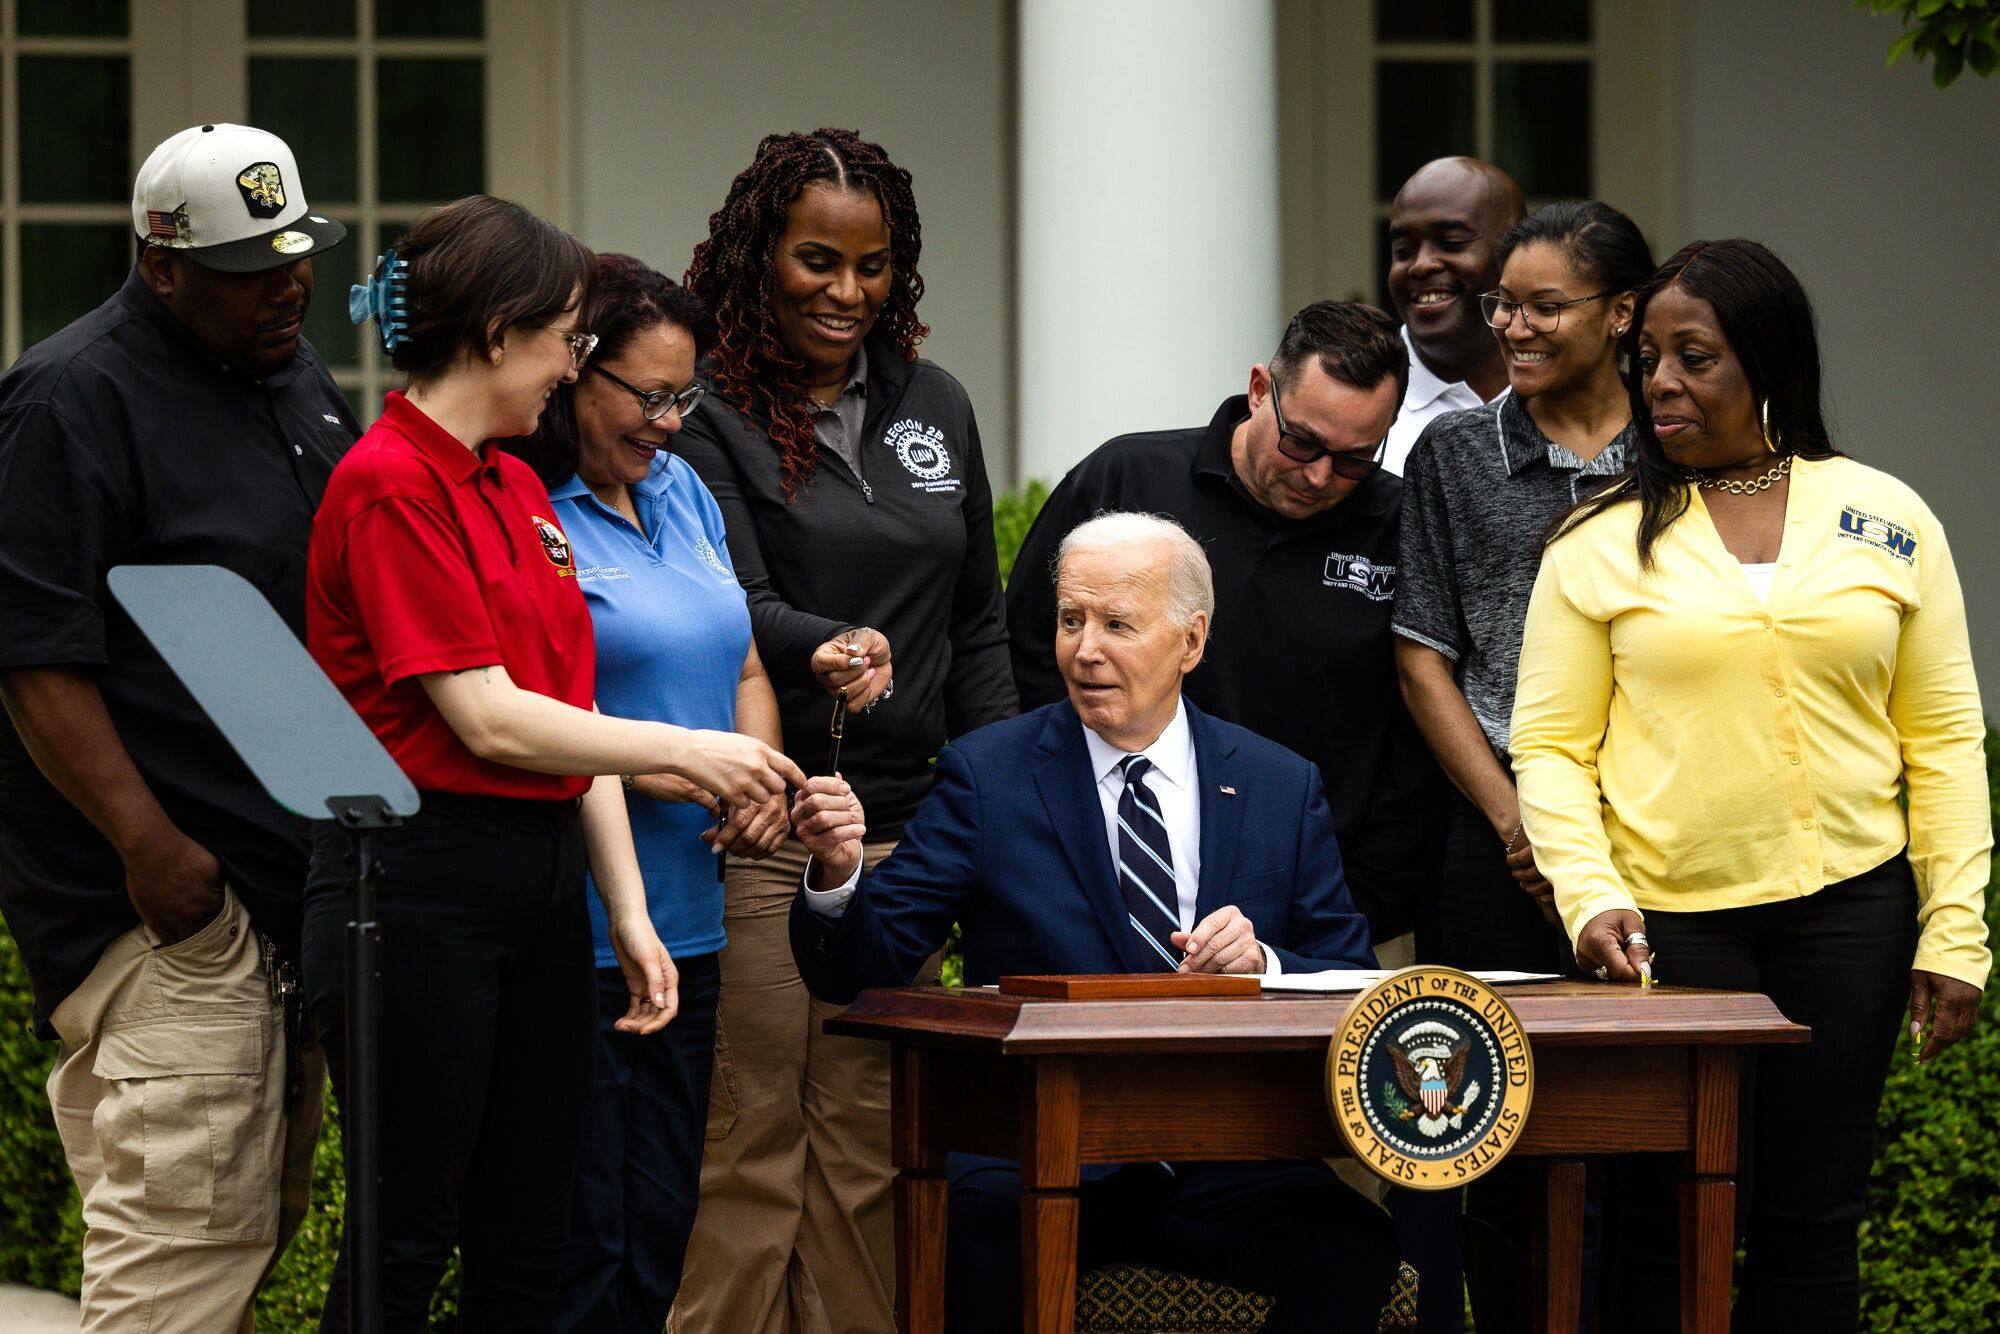 US President Joe Biden (centre) speaks to union workers after signing orders that increase tariffs on China during an event in the Rose Garden of the White House in Washington on May 14. Biden’s order raises tariffs on a wide range of Chinese imports, including semiconductors, batteries, solar cells and critical minerals in an election-year bid to bolster domestic manufacturing in critical industries. Photo: Bloomberg